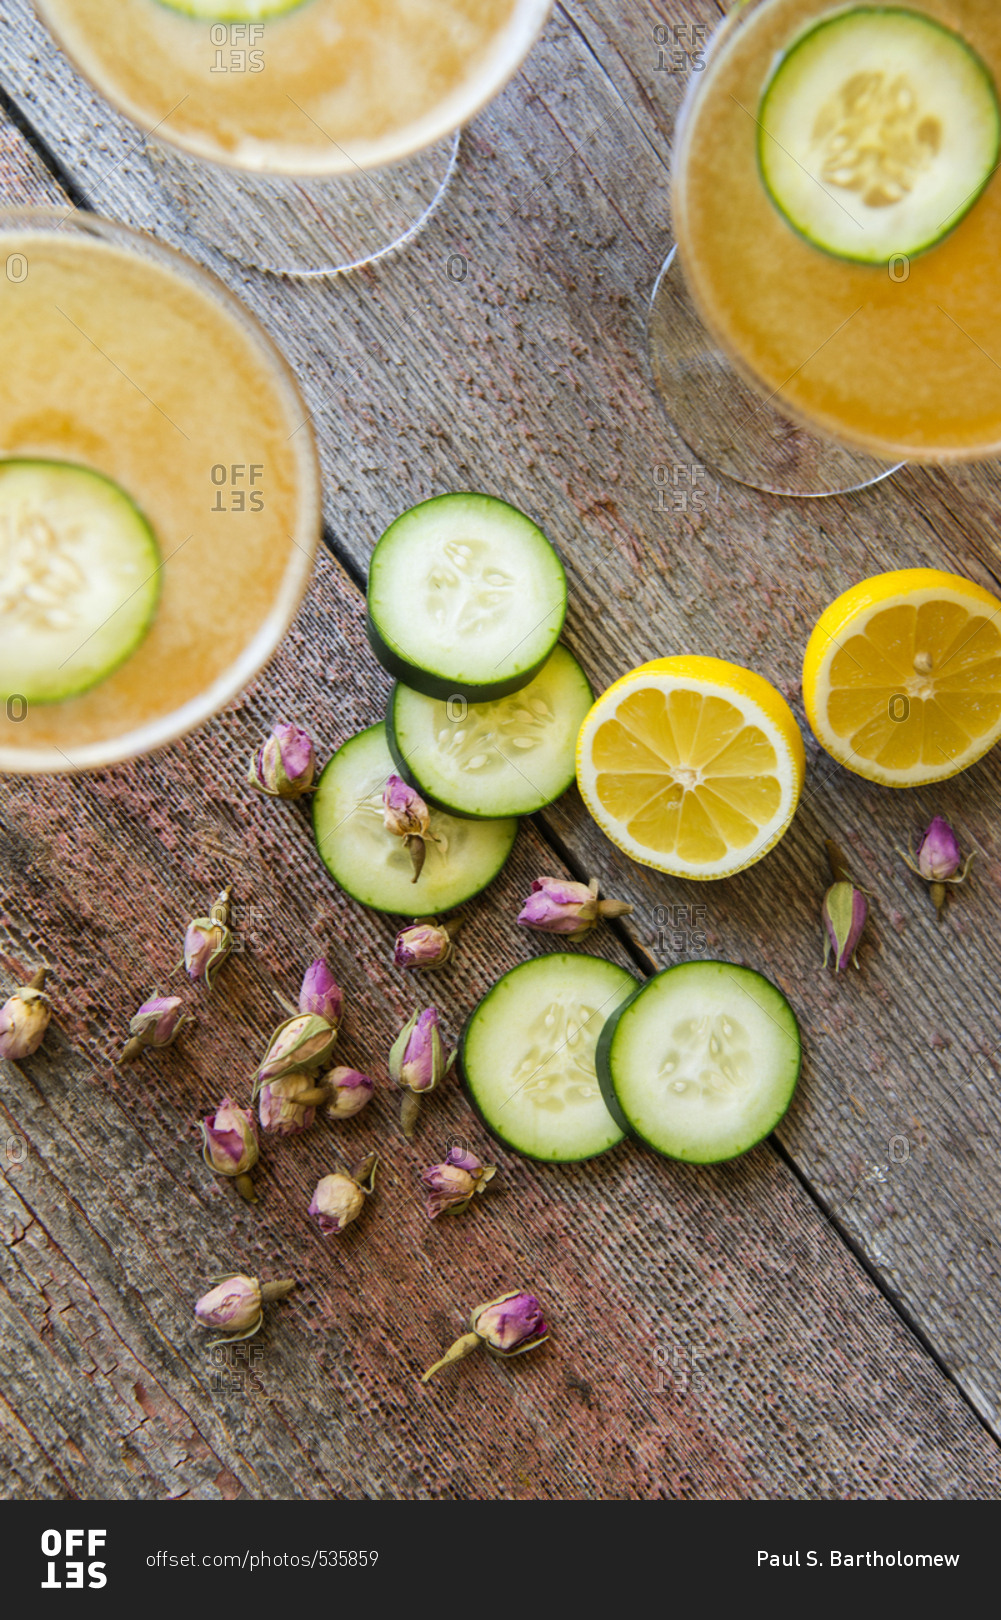 Grapefruit mixed drinks served with cucumber slices, lemon, and flower buds